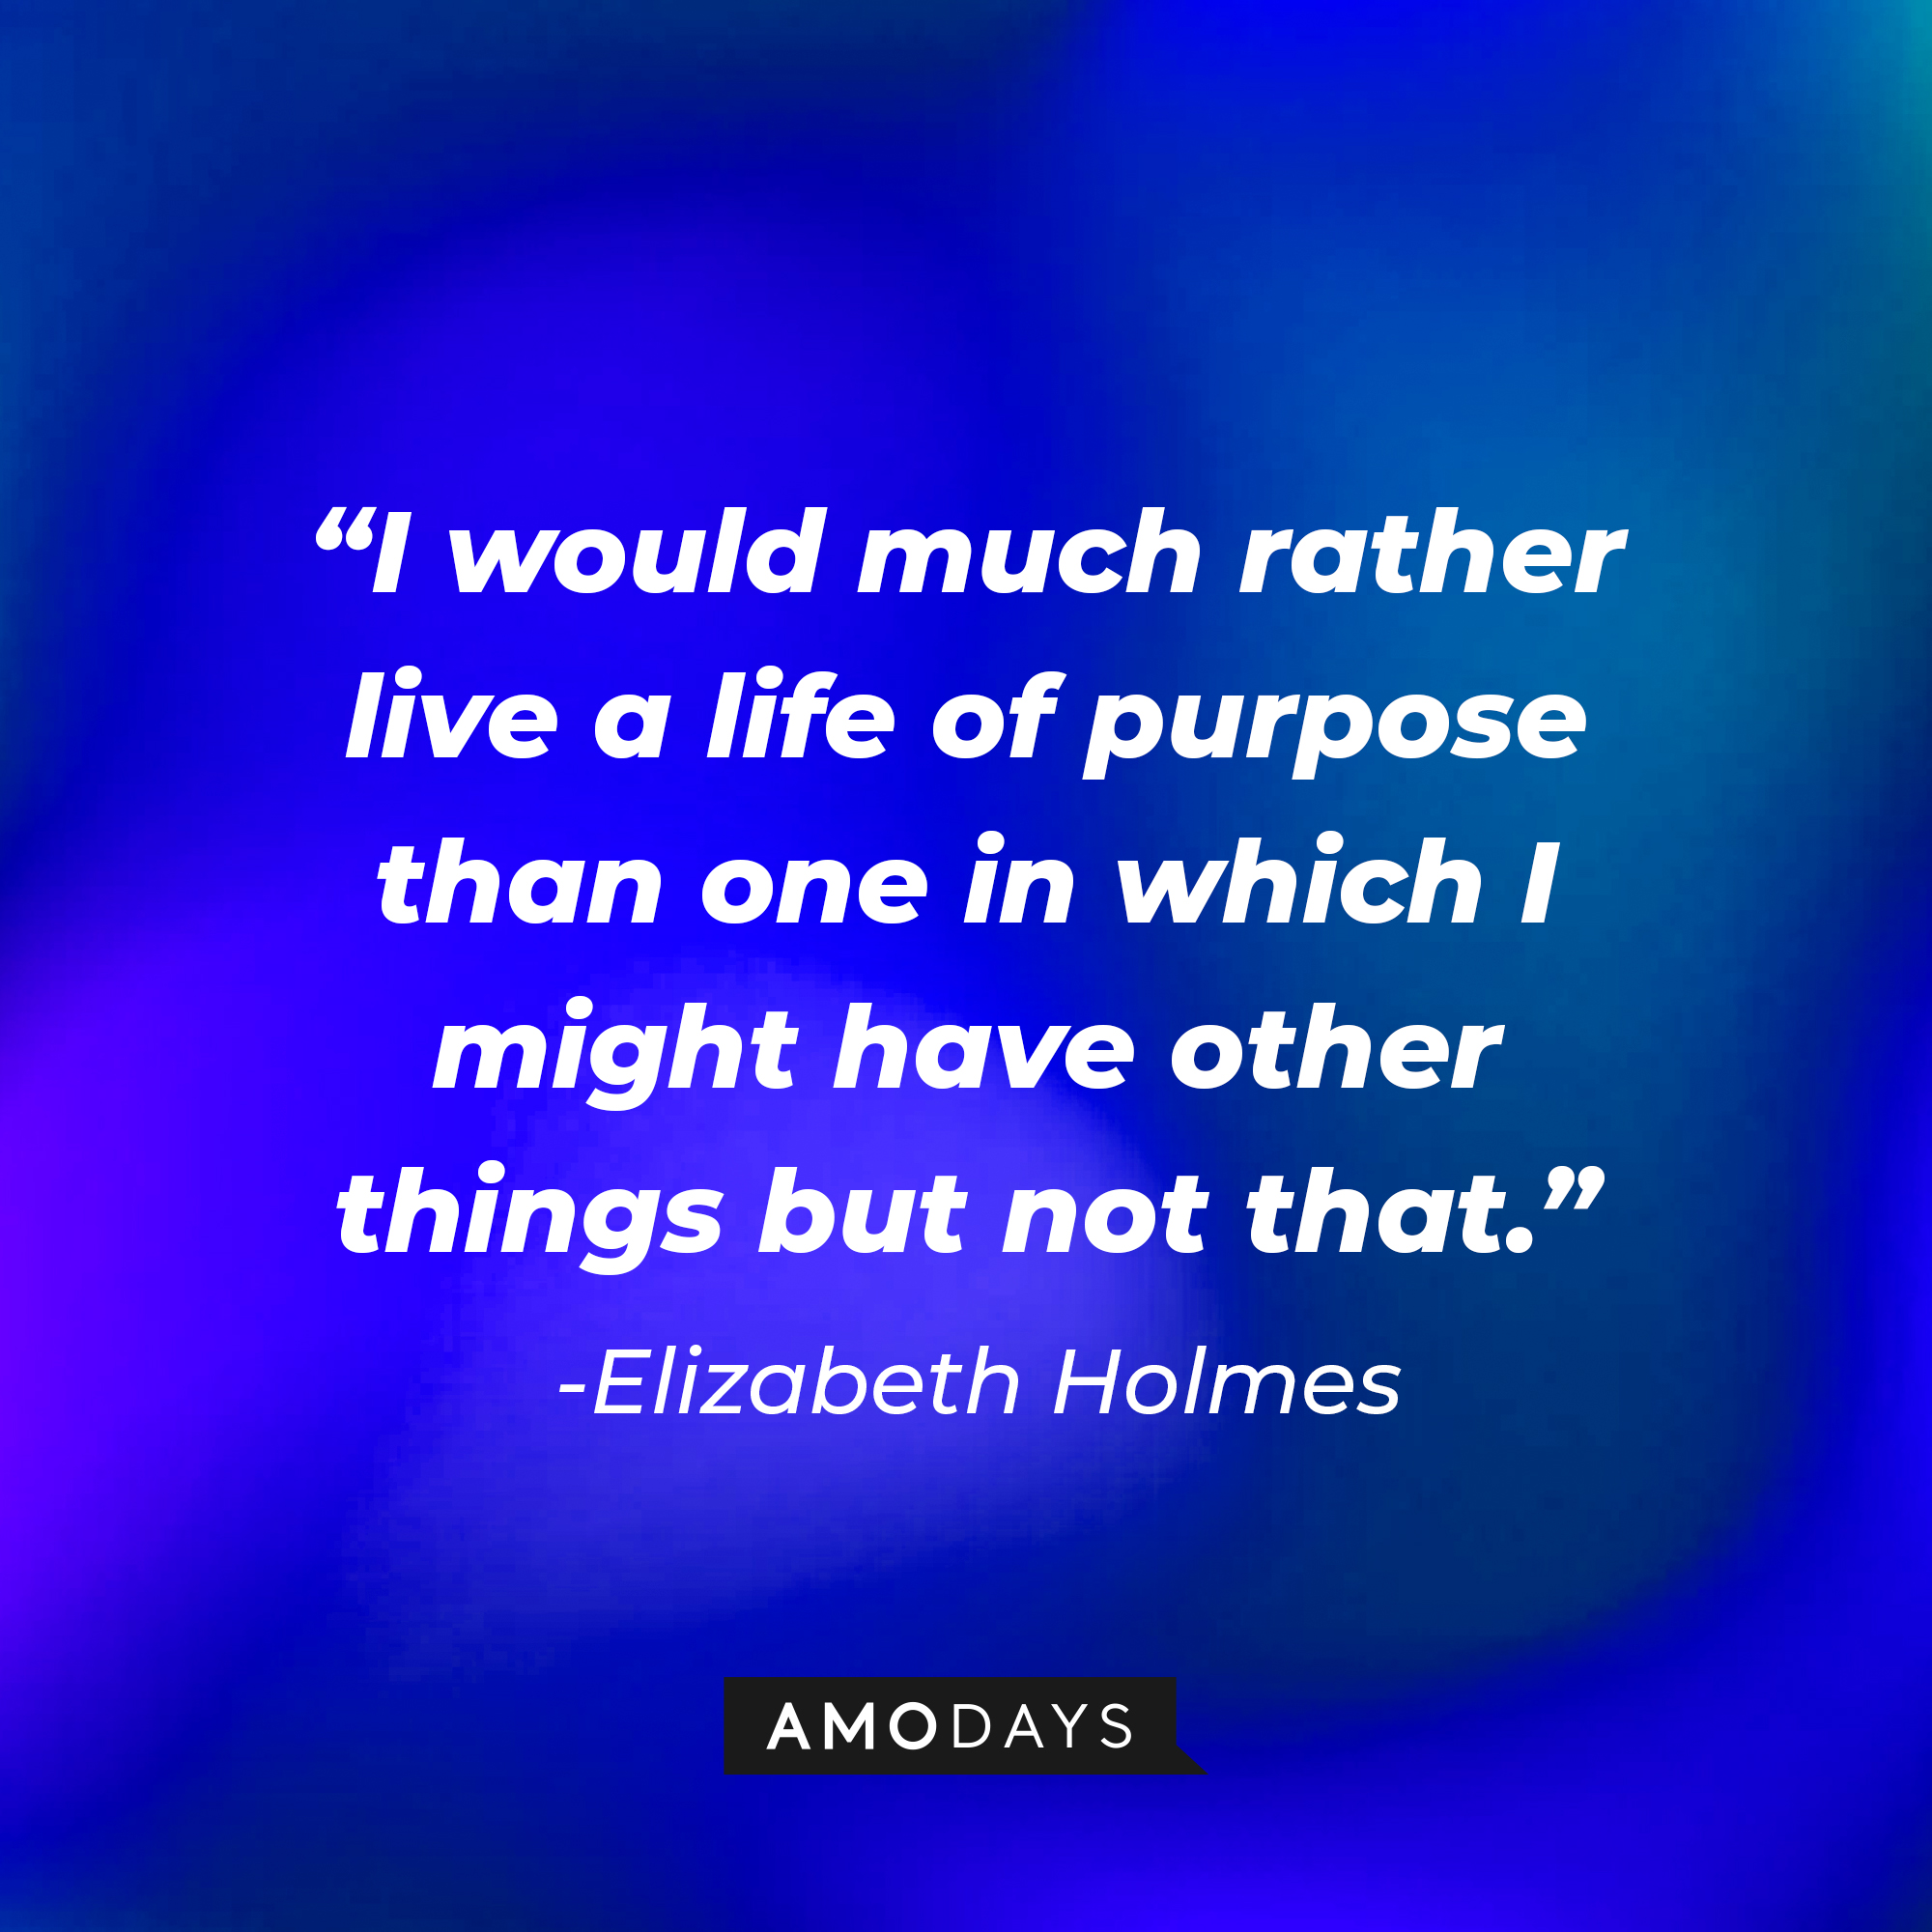 Elizabeth Holmes' quote: "I would much rather live a life of purpose than one in which I might have other things but not that." | Source: Amodays